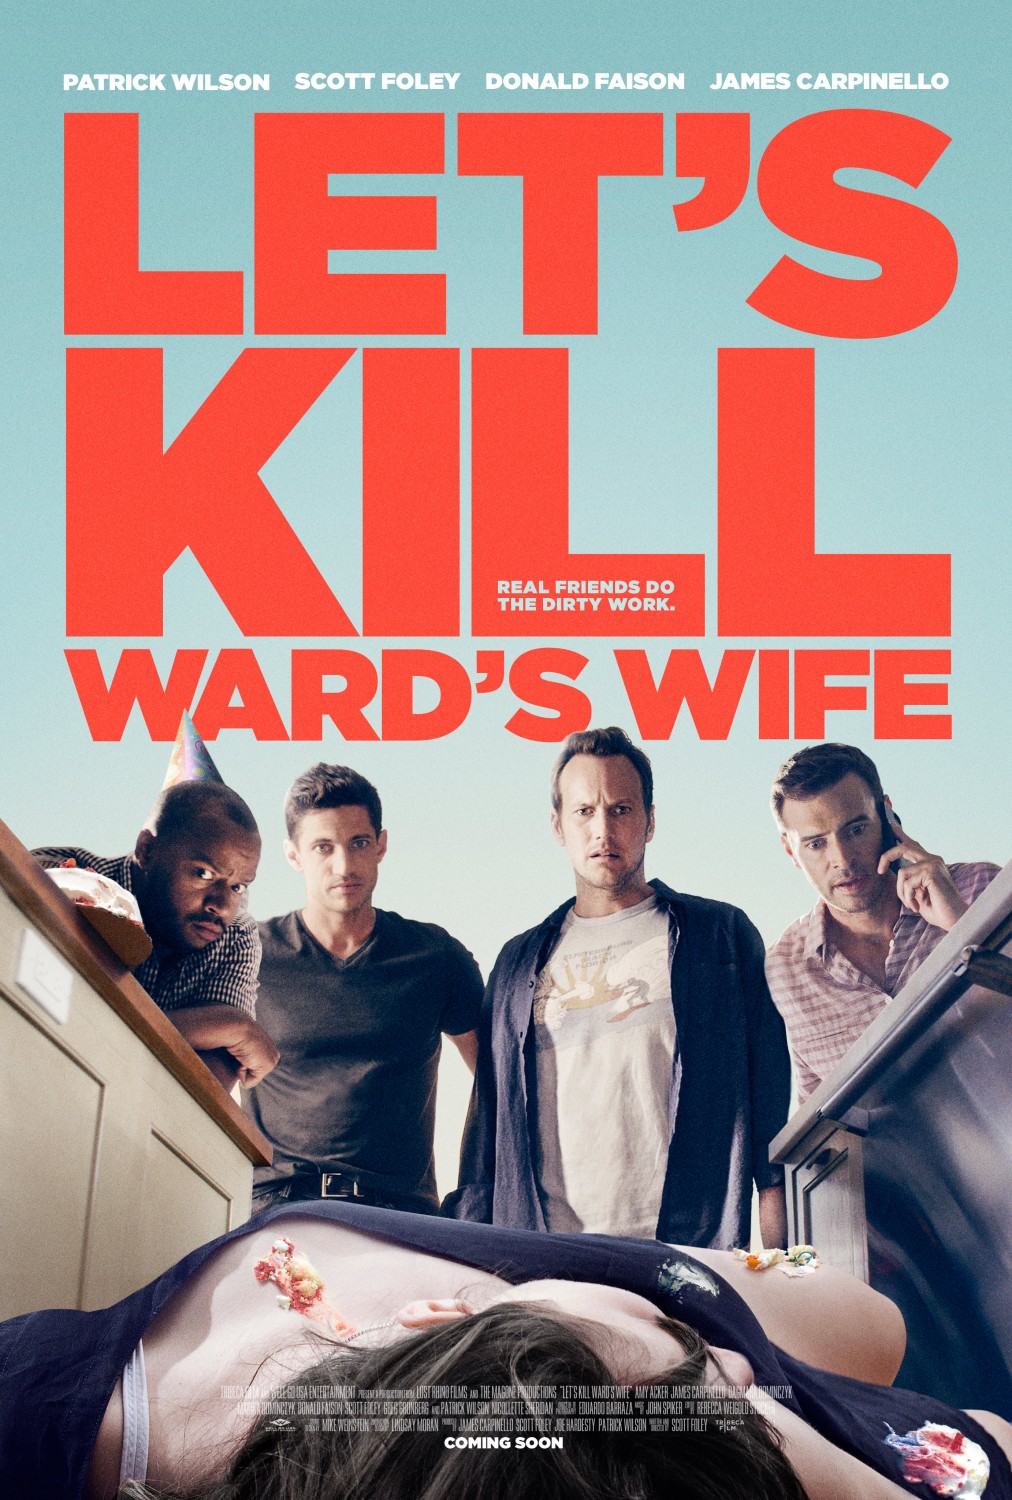 Extra Large Movie Poster Image for Let's Kill Ward's Wife 